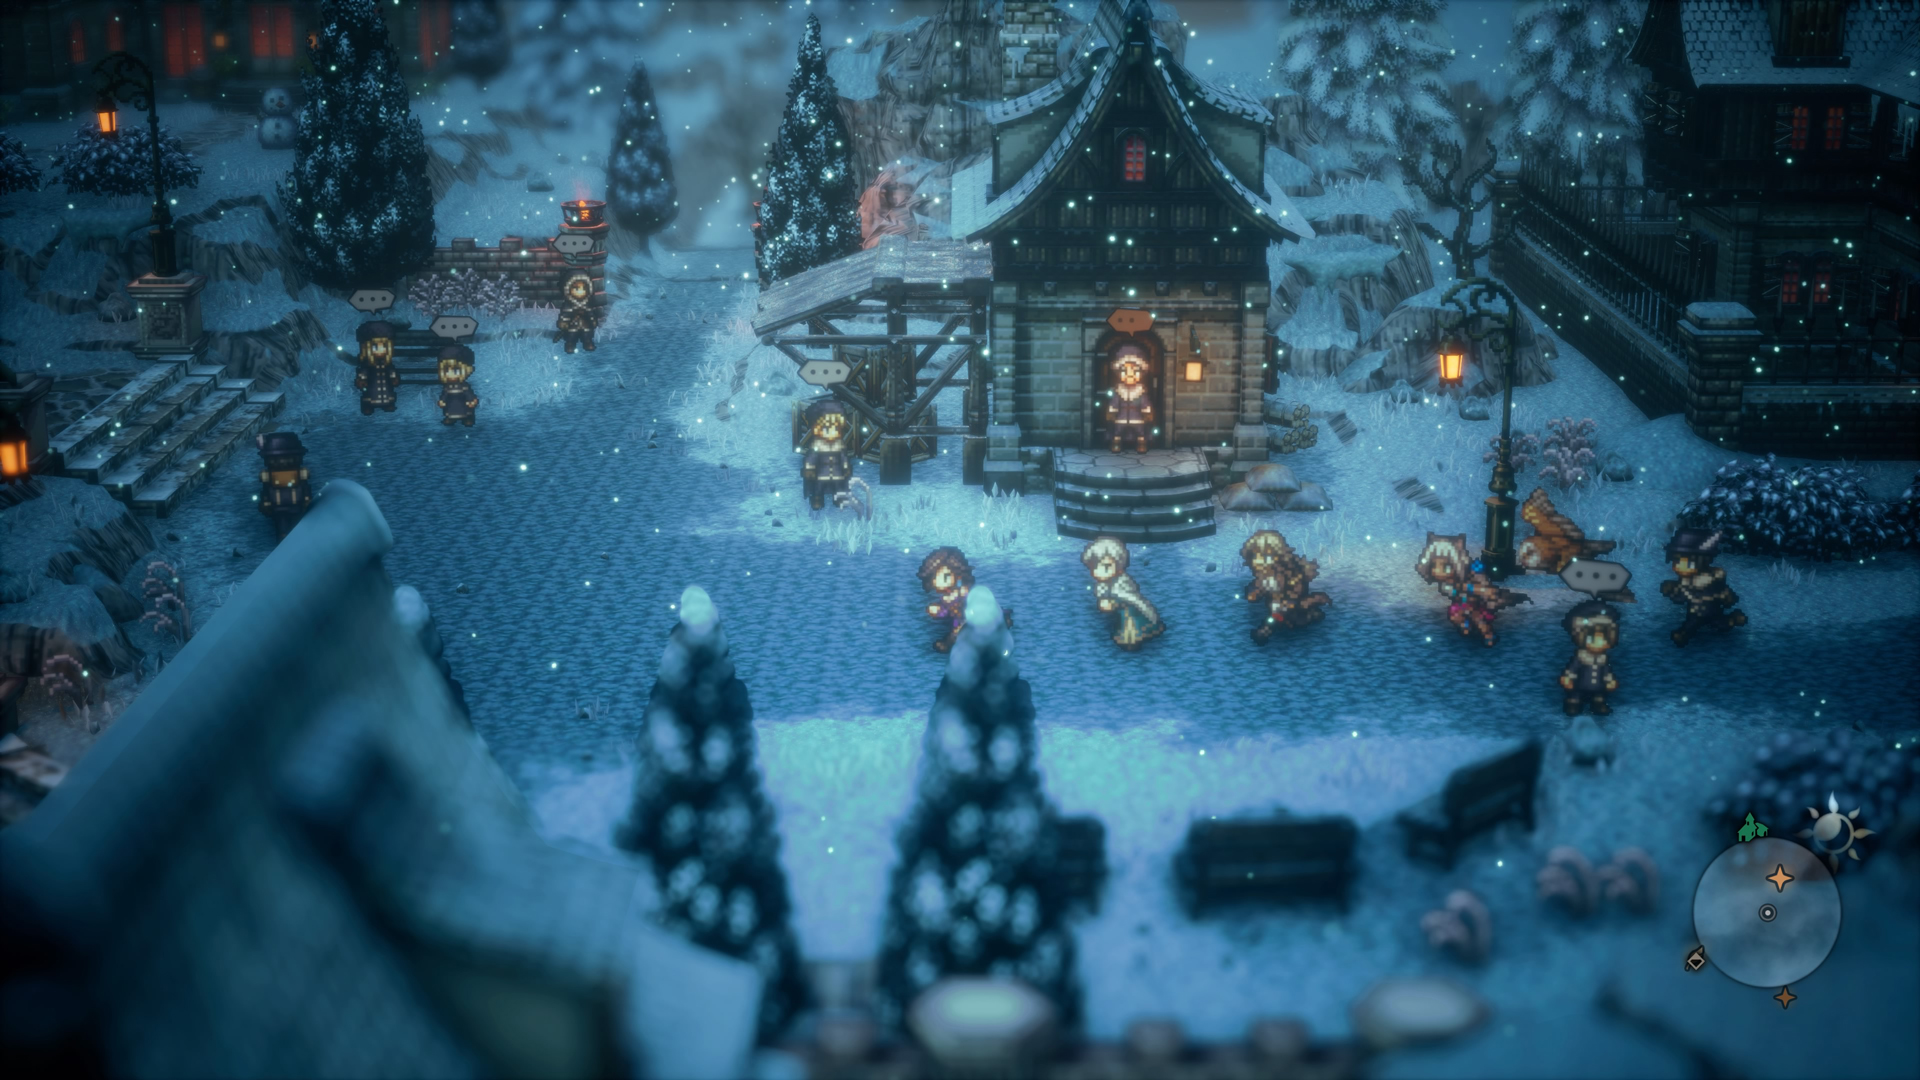 OCTOPATH TRAVELER II Review - Console Game Stuff